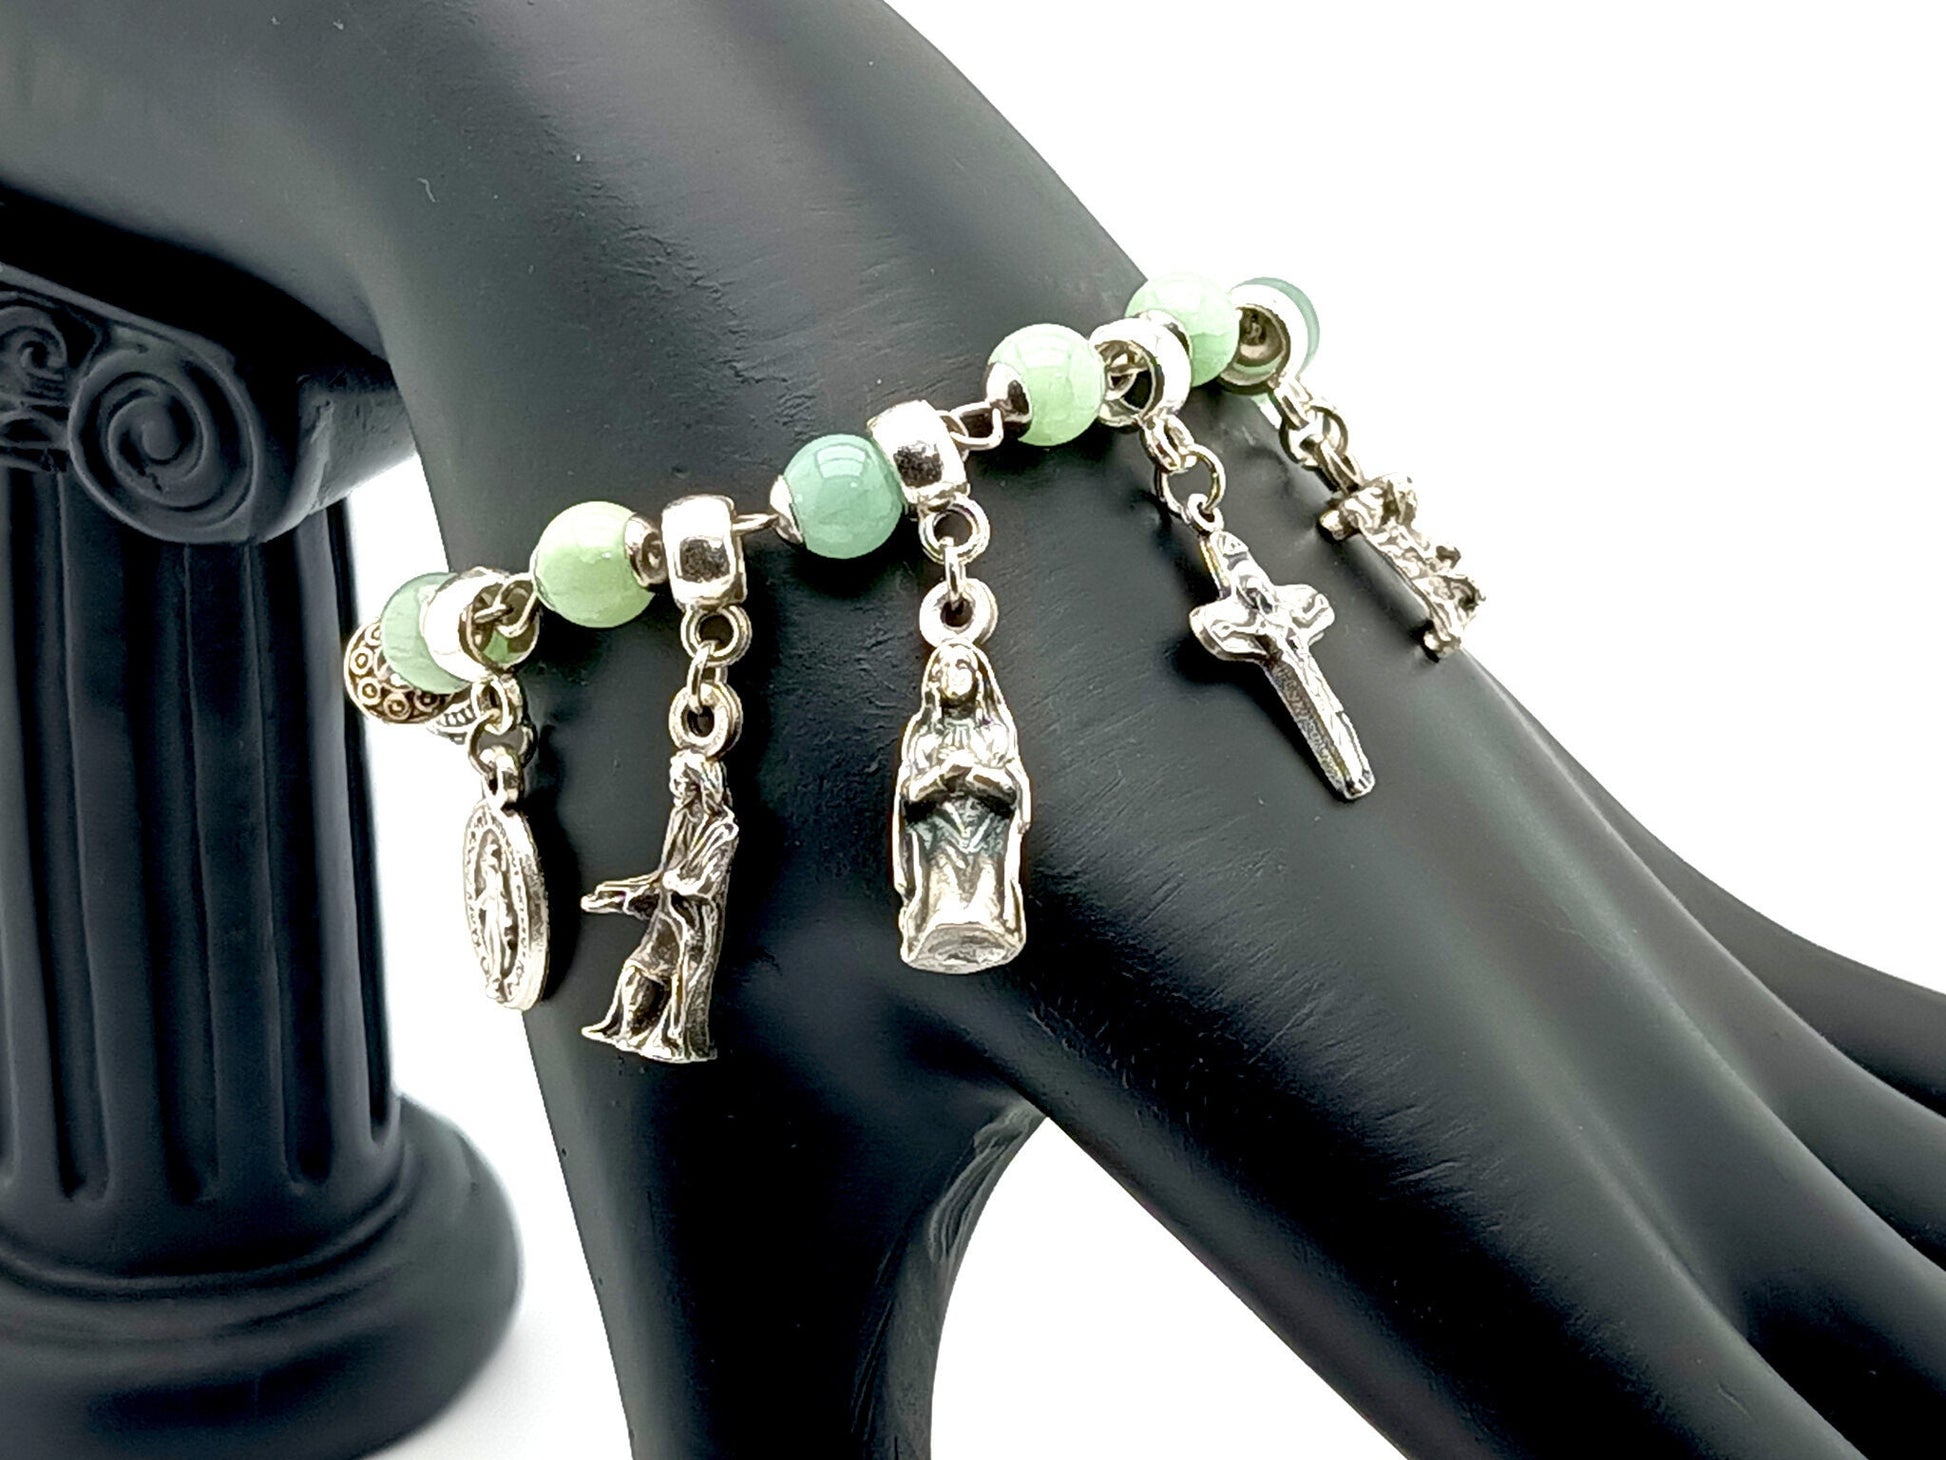 The Nativity unique rosary beads single decade bracelet with jade gemstone beads, three kings, Saint Joseph and the Virgin Mary pendant medals.